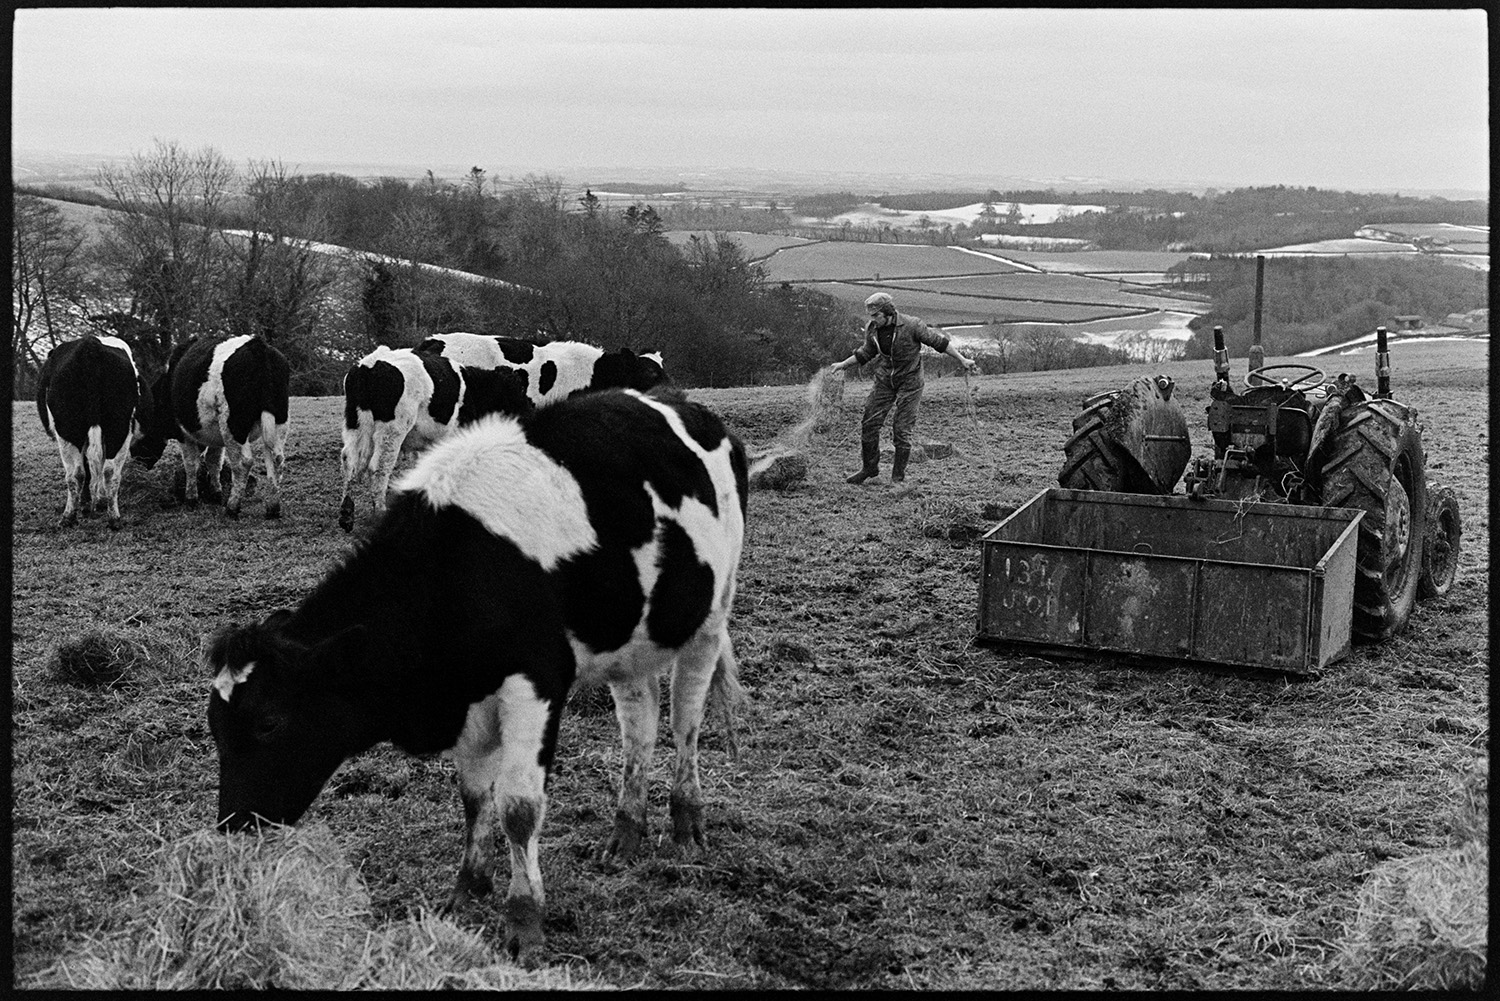 Farmers feeding cows, checking new born calves. 
[Simon Berry feeding hay to cattle in a field at South Harepath, Dolton. His tractor and ink box are parked in the field. Snowy fields can be seen in the background.]